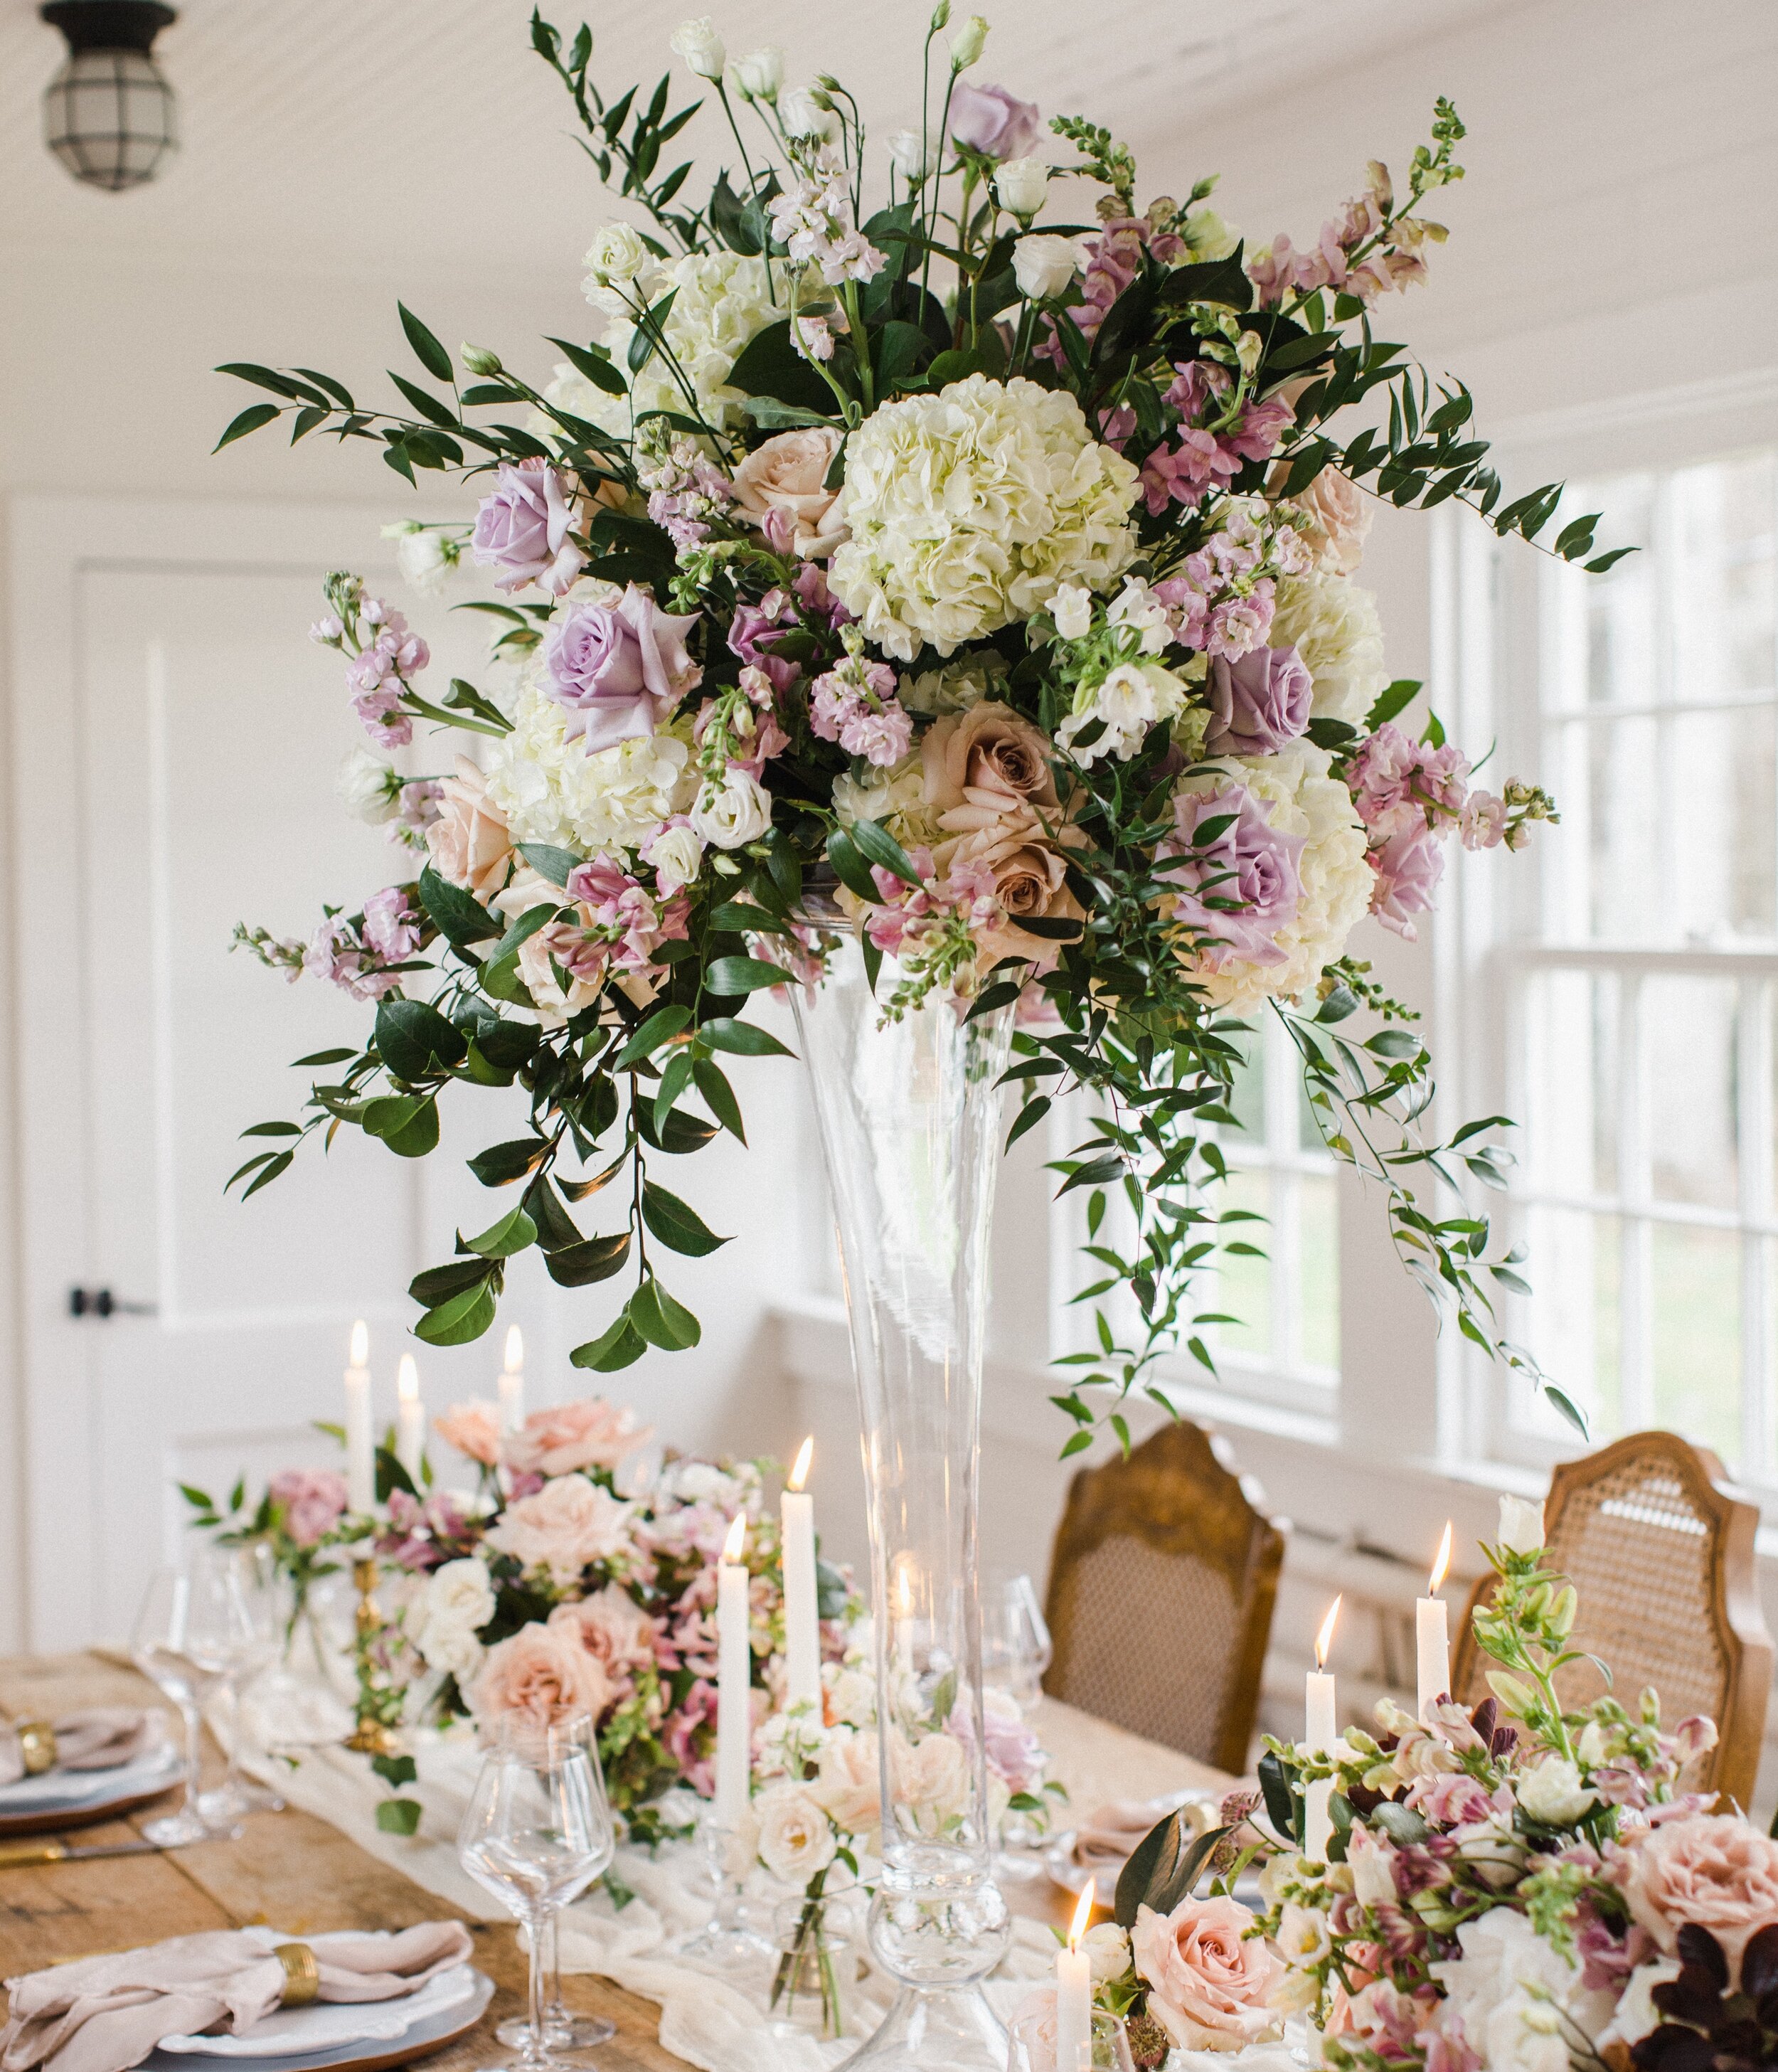 Elevated Floral Design by Wyoming Stuyvesant Floral